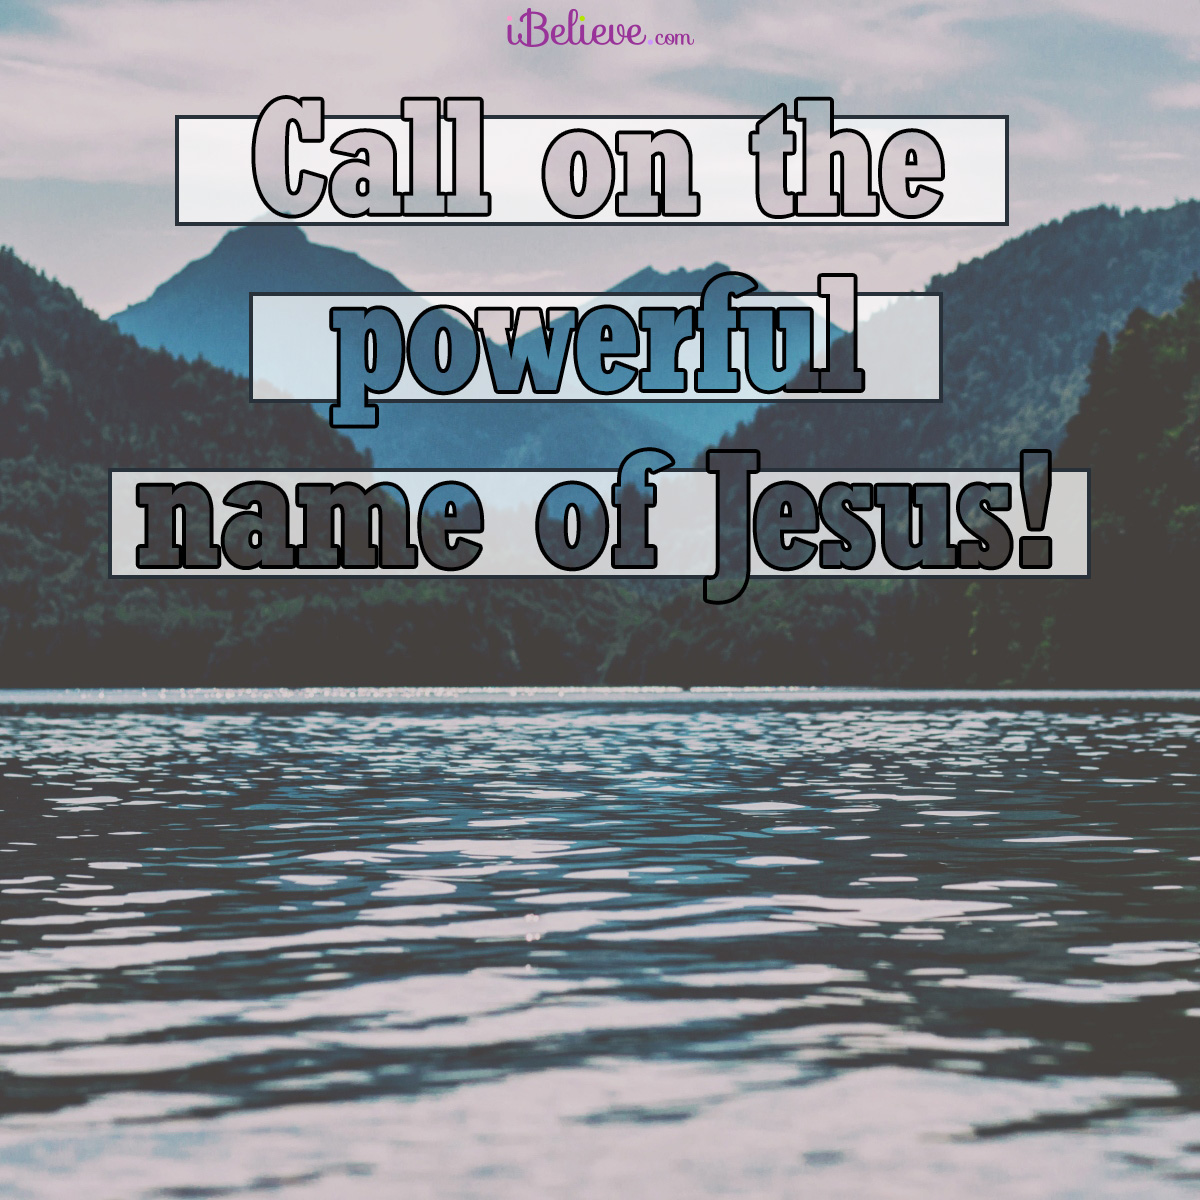 Call on the powerful name of Jesus, inspirational image